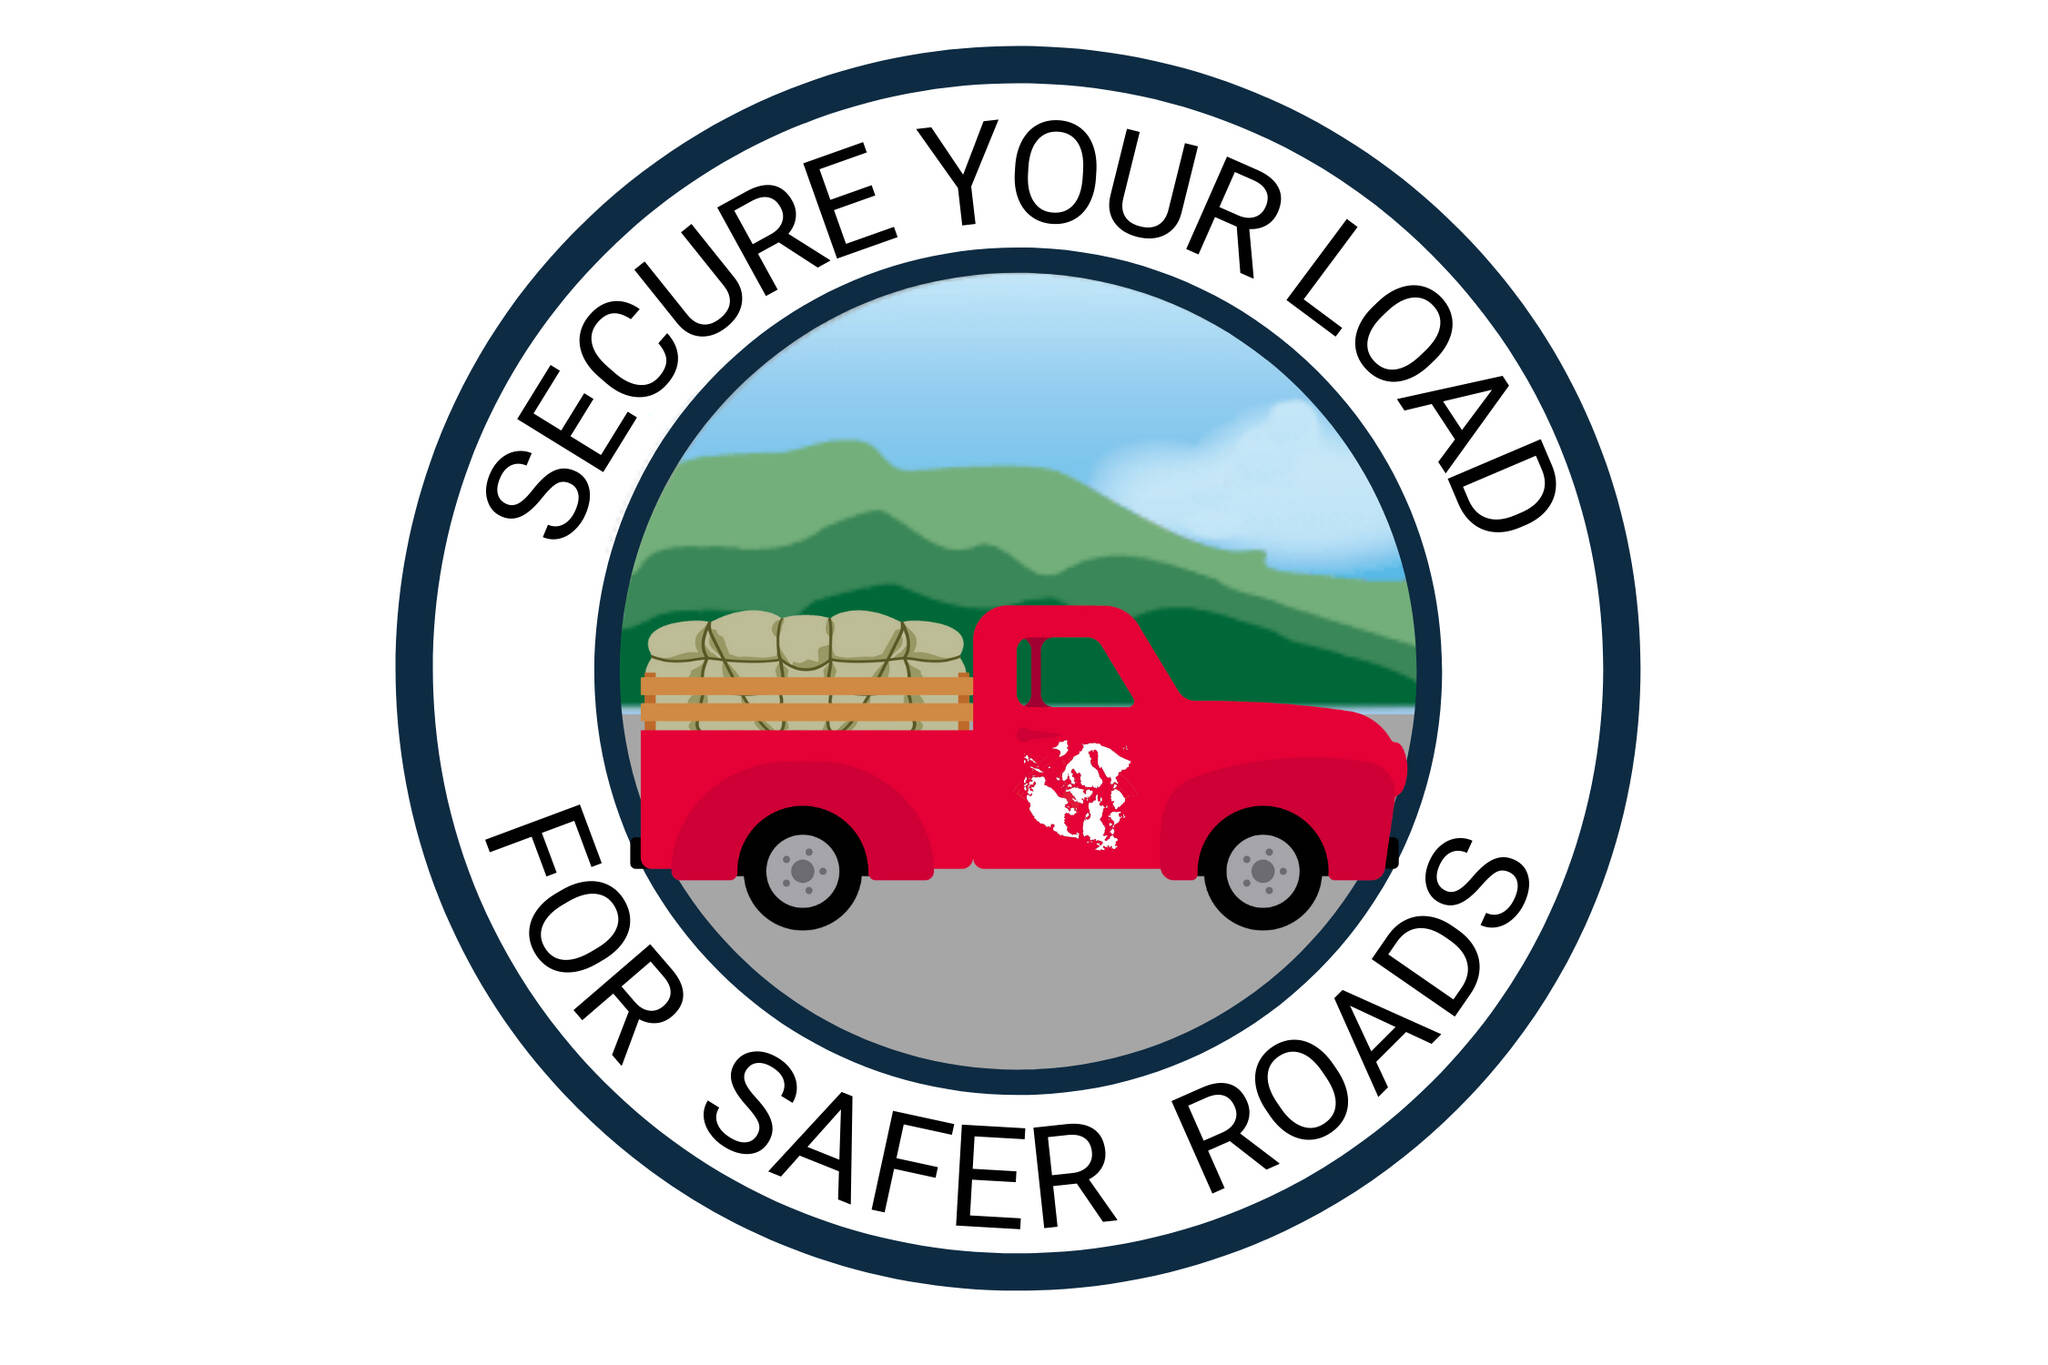 San Juan County/Secure your load campaign logo